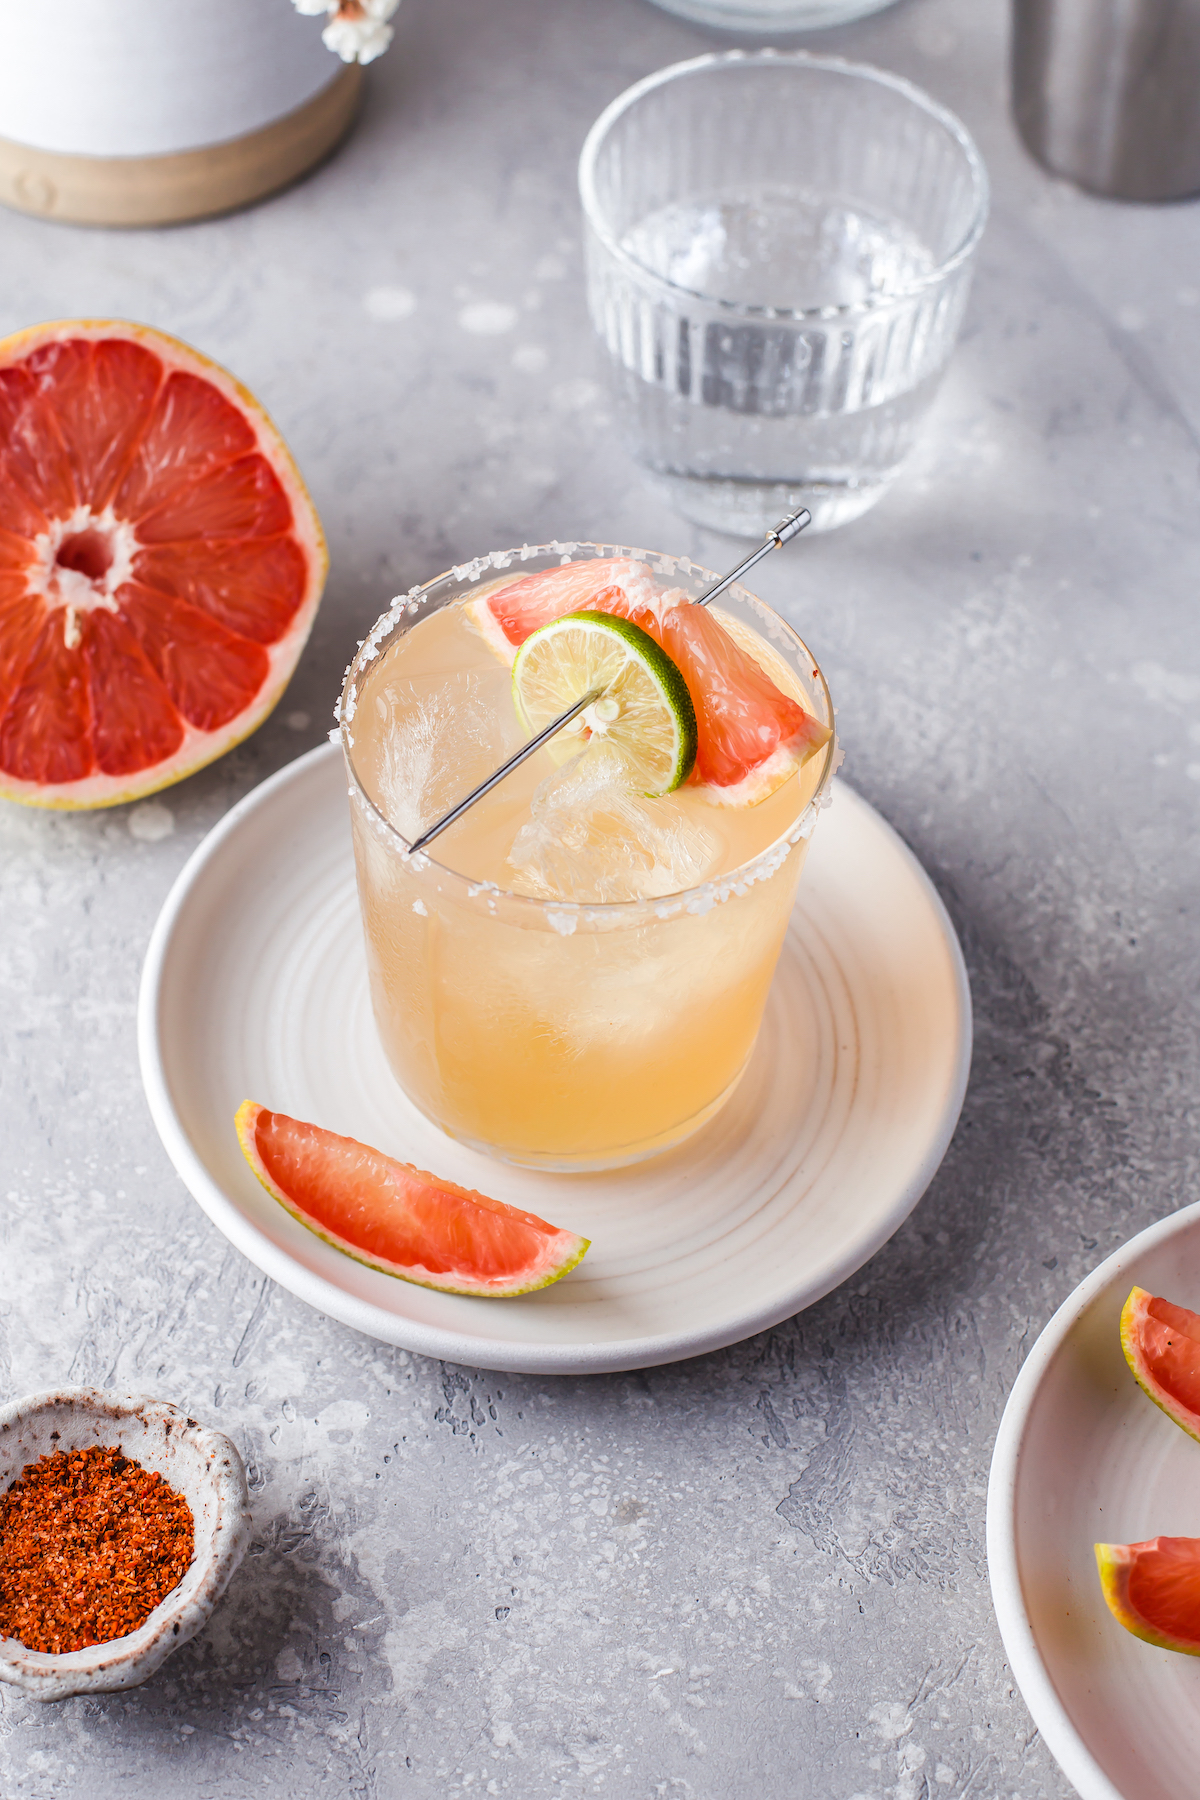 A grapefruit Paloma cocktail on a plate.